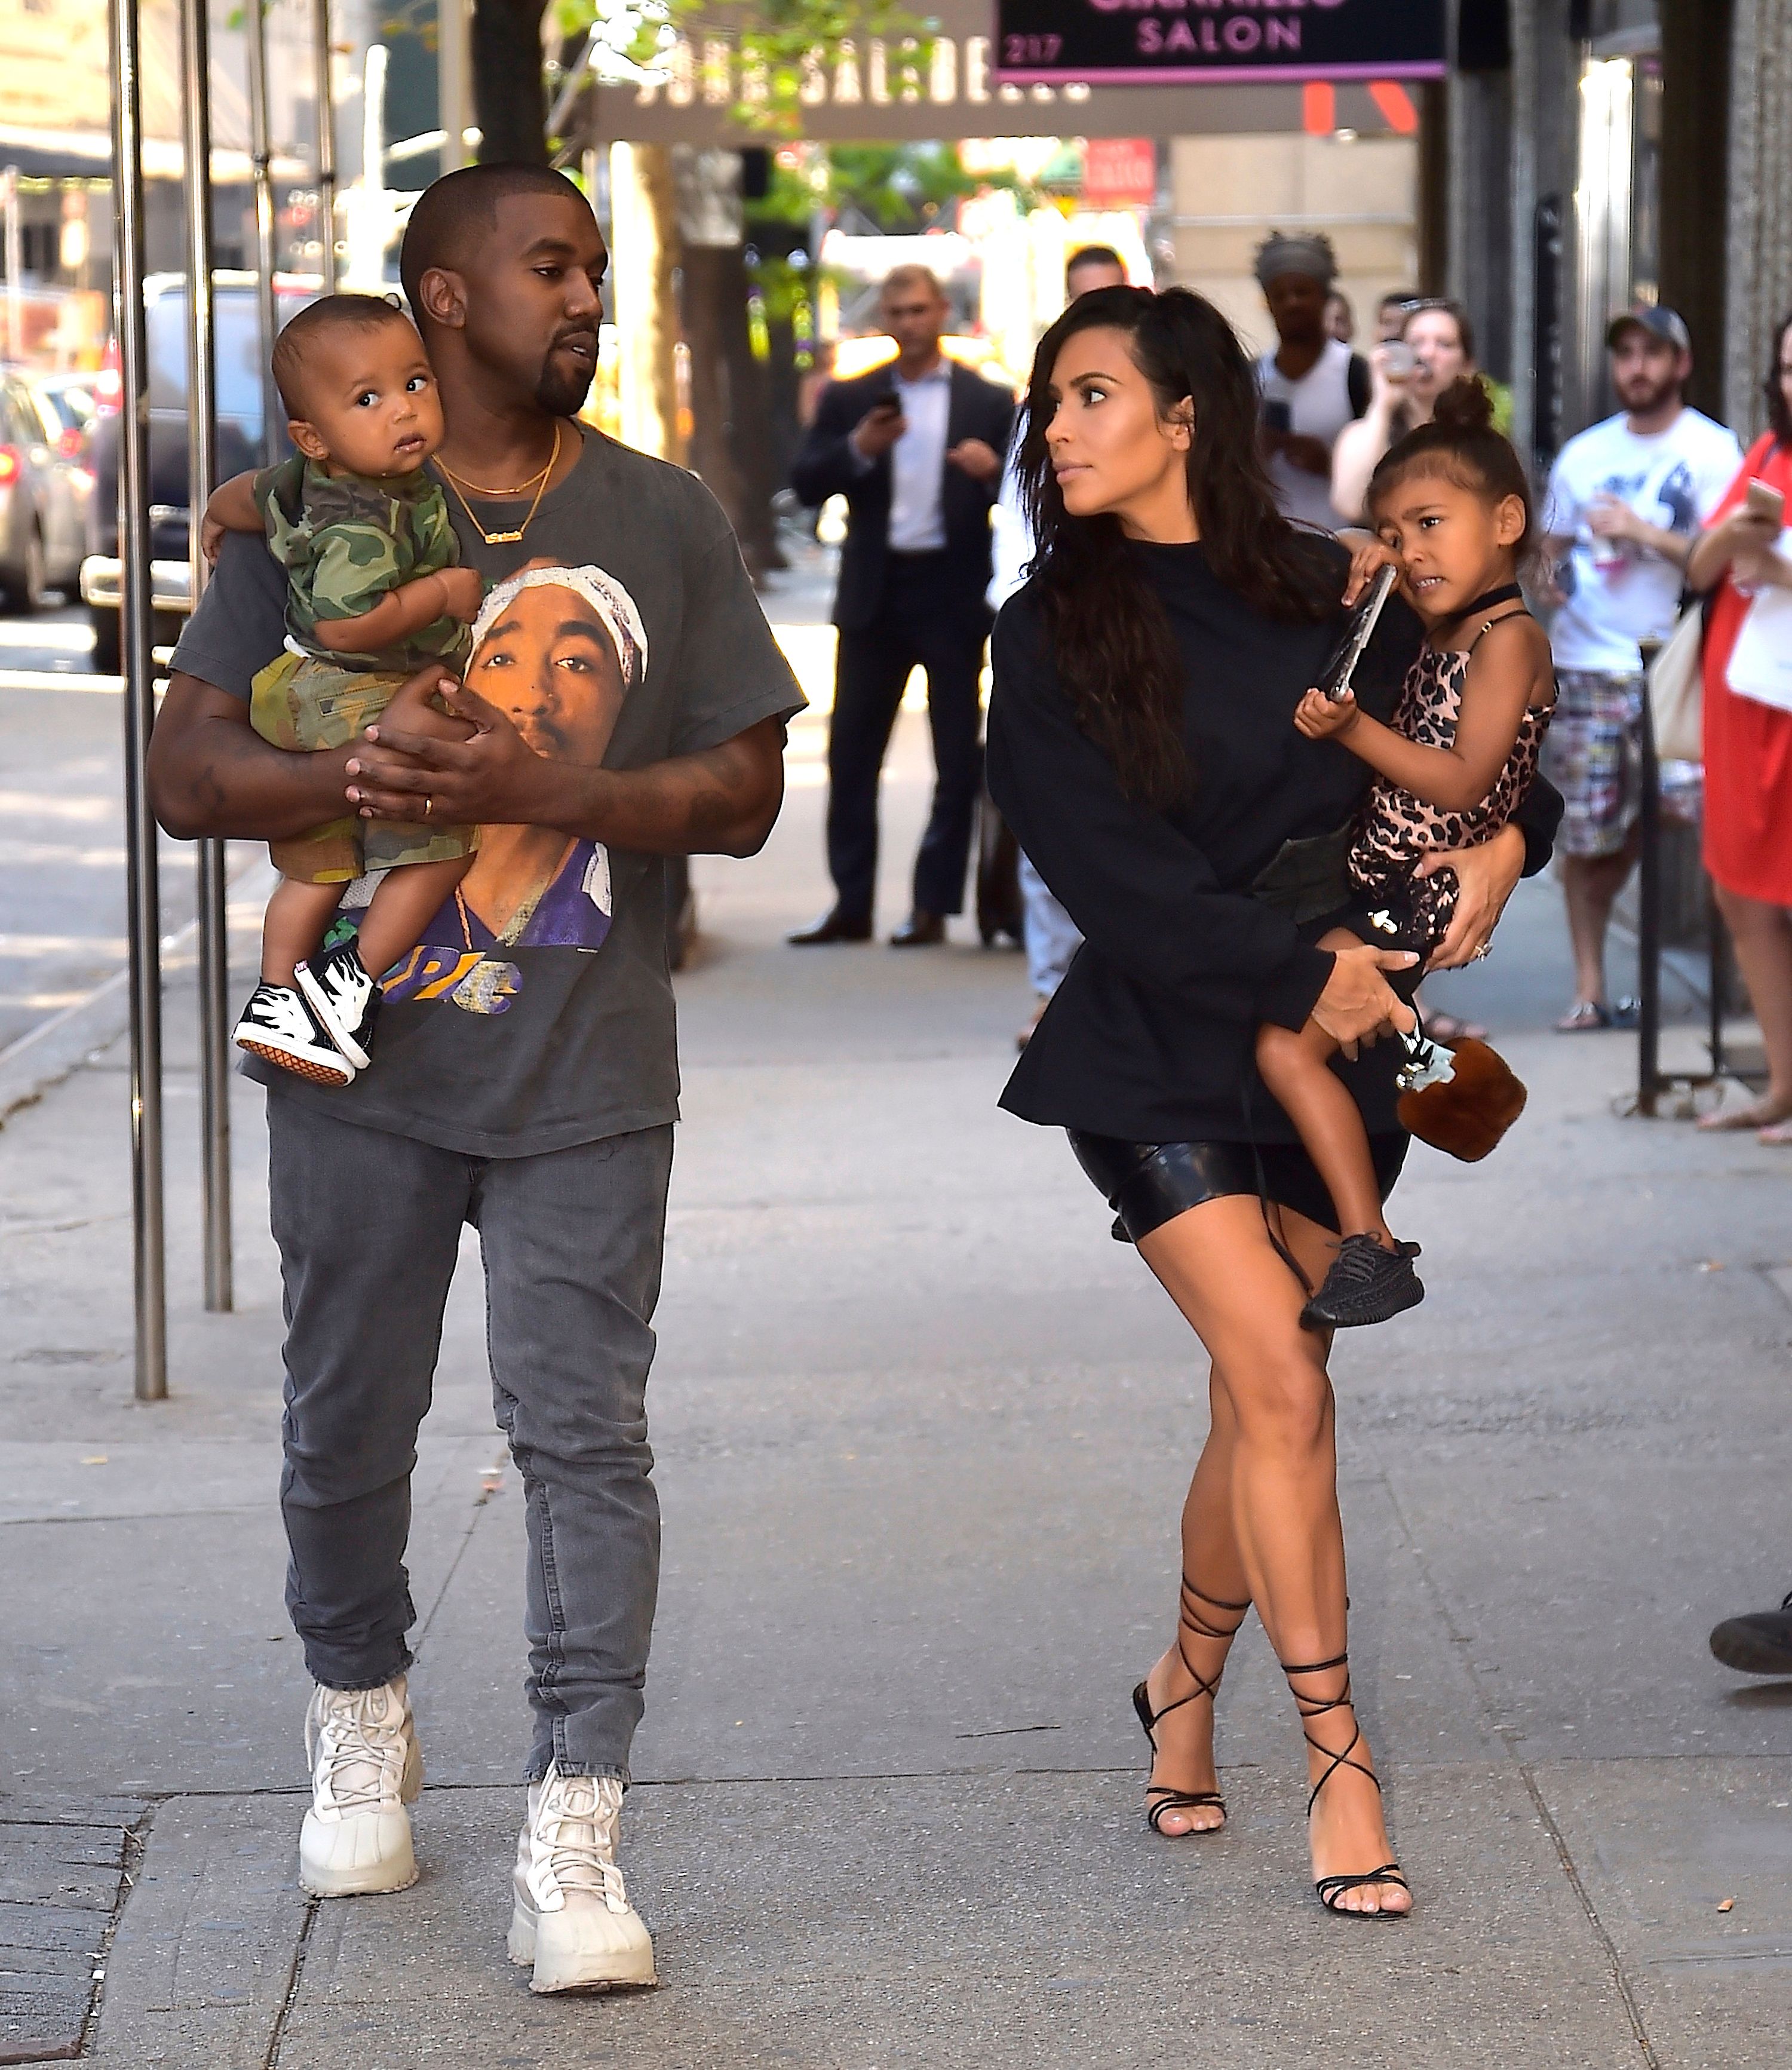 Kanye West and Kim Kardashian with North West and Saint West walking in the Upper East Side on August 29, 2016, in New York City | Photo: Alo Ceballos/GC Images/Getty Images